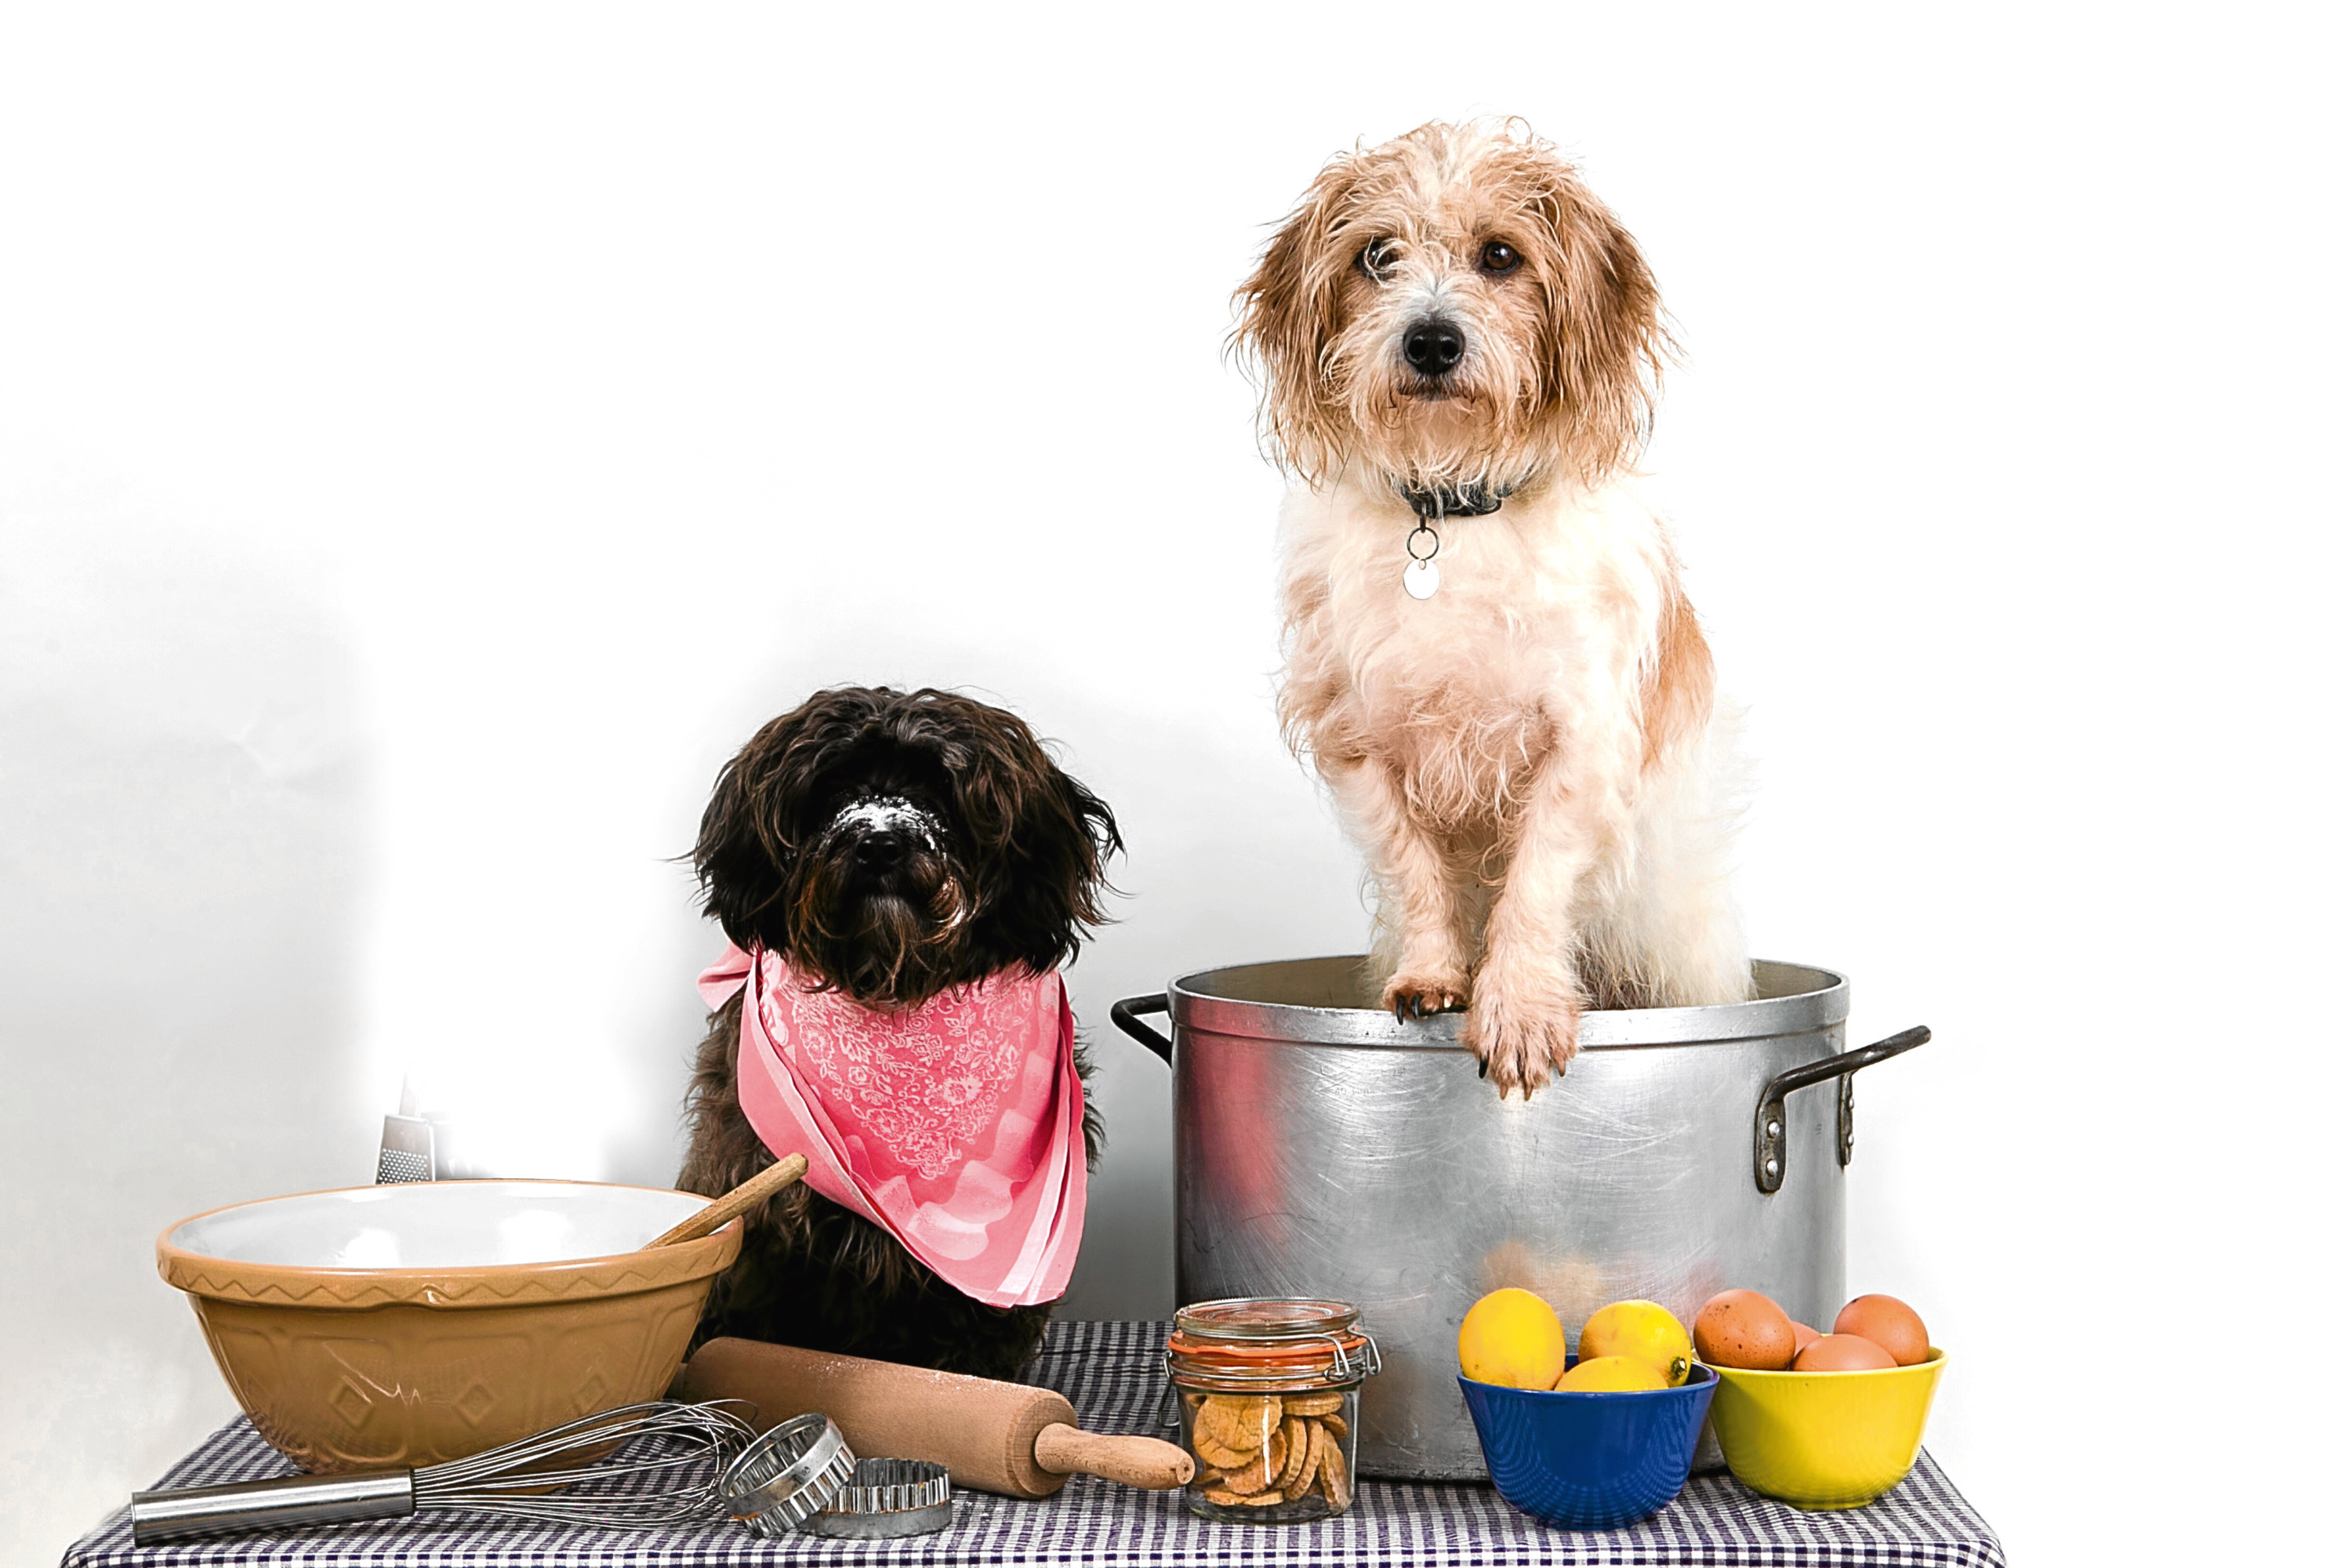 The "Hairy Bakers", dogs Tilly and Mungo, who have written a cook book for dog snacks. (Andrew Cawley)